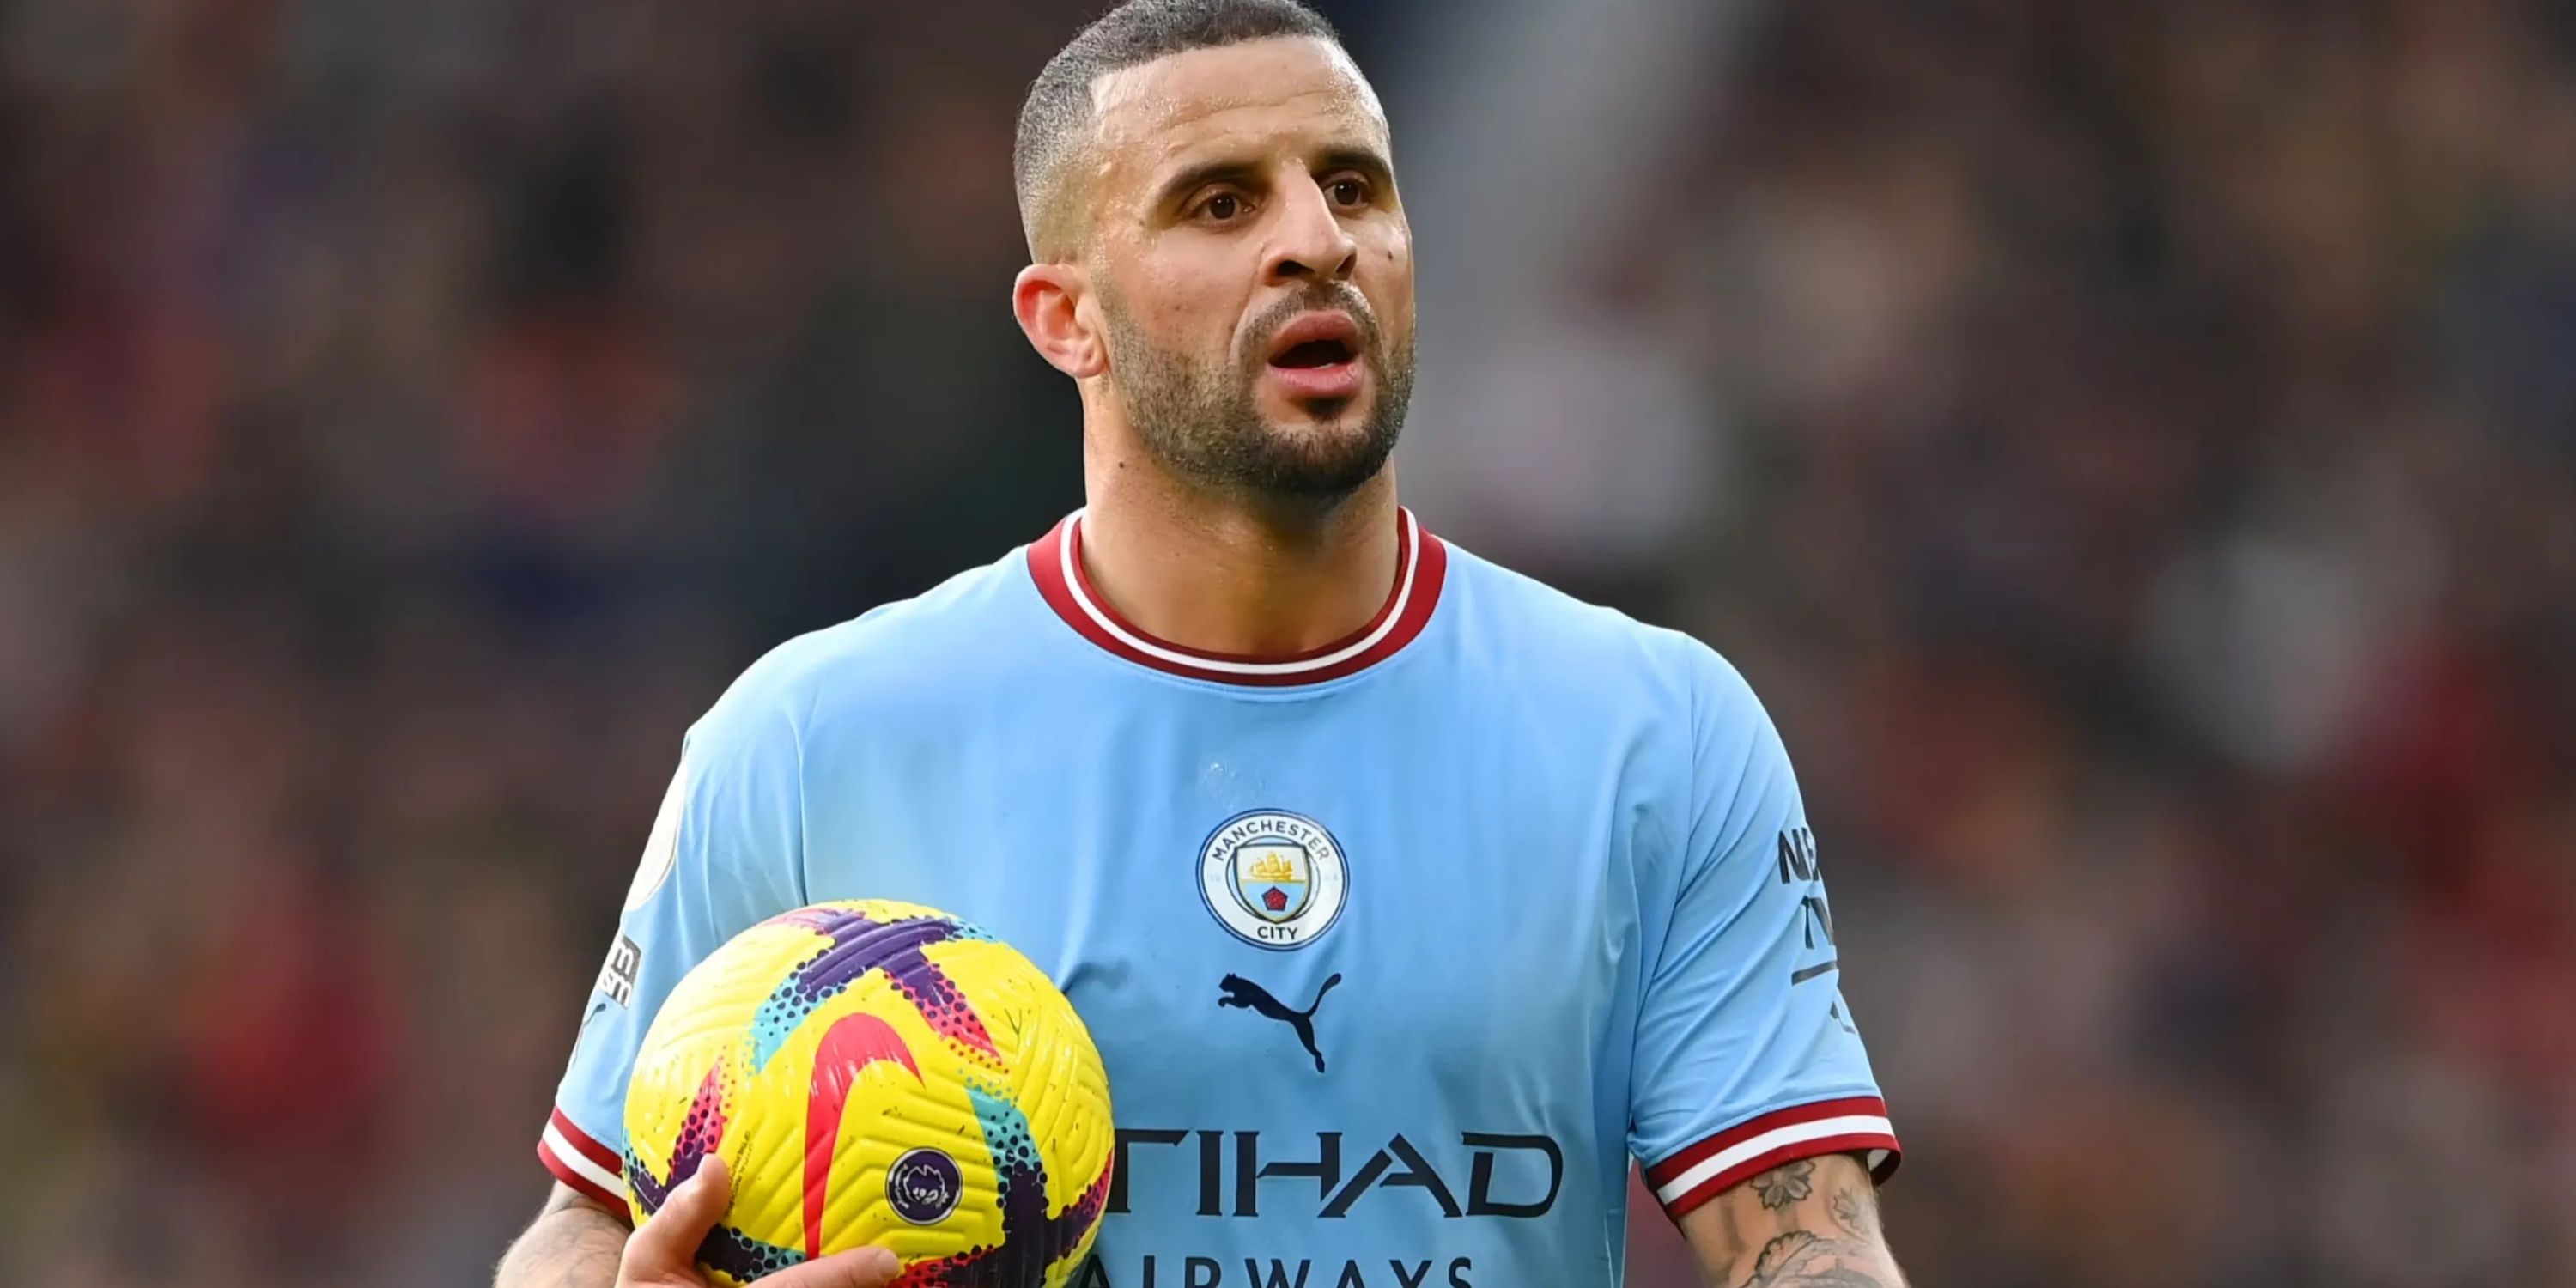 Kyle Walker playing for Manchester City.